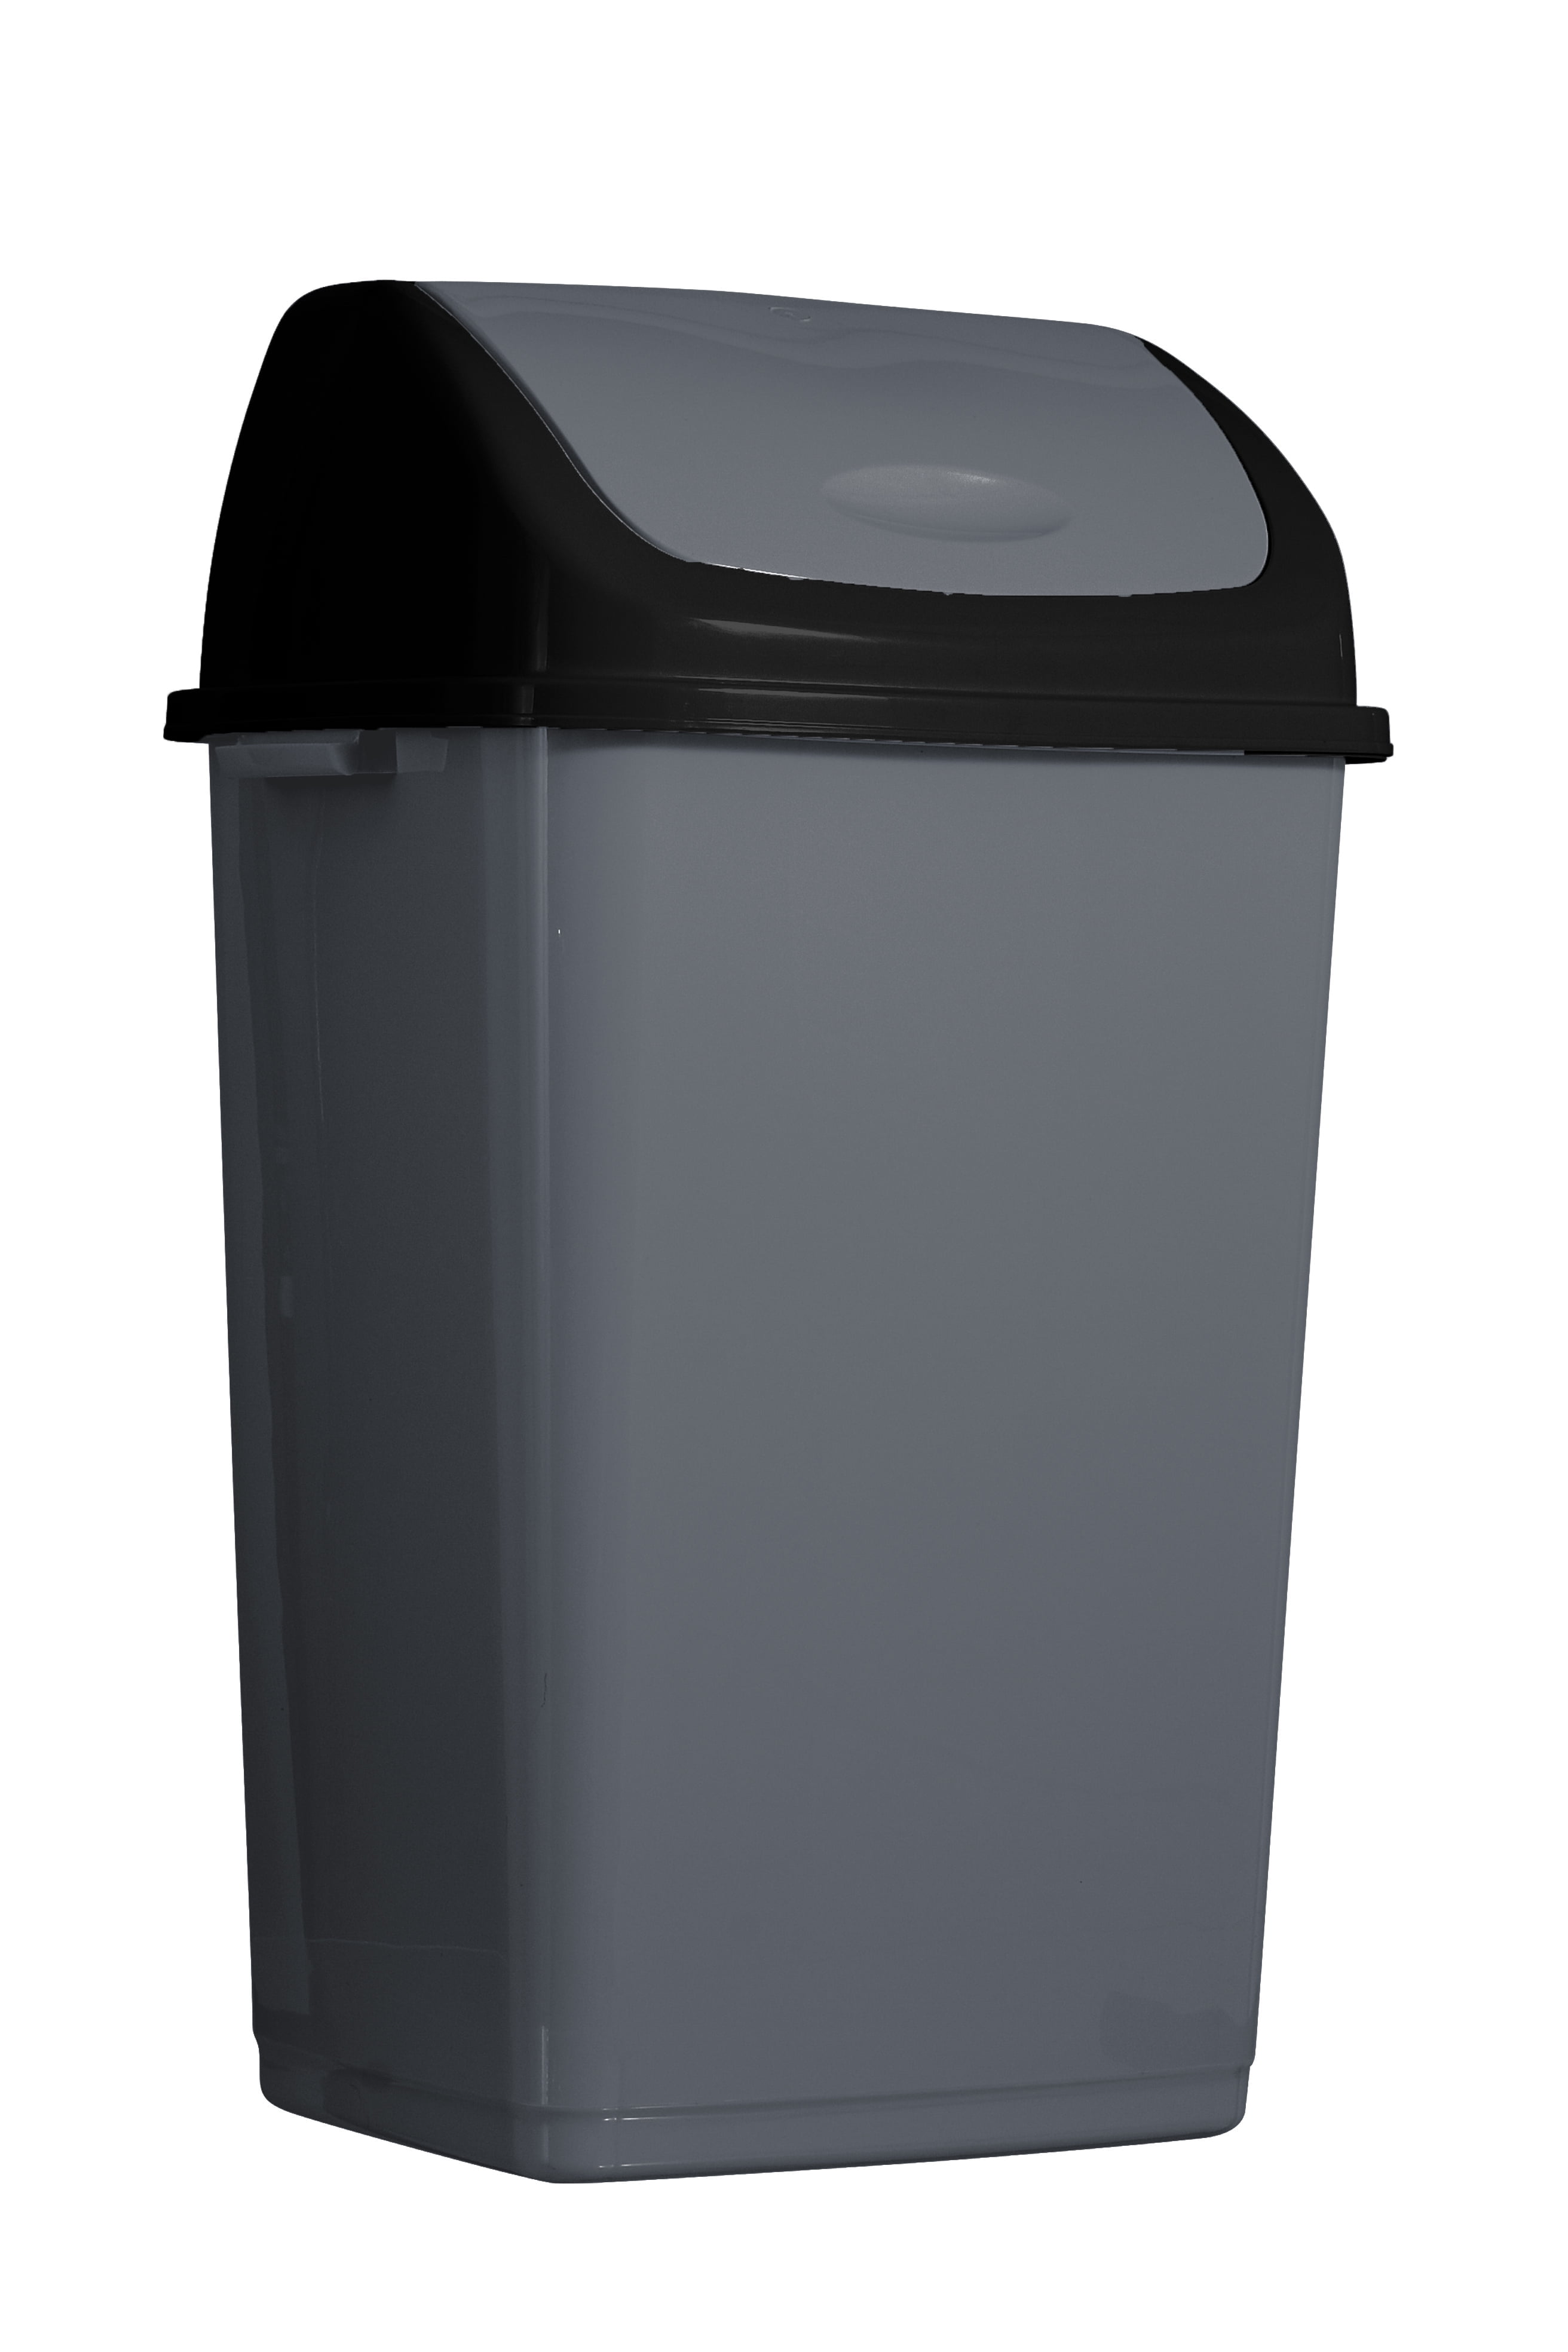 Superio Large 13 Gallon Swing Top Trash Can for Kitchen, Indoor/ Outdoor 52  Qt, Plastic (Onyx Grey)